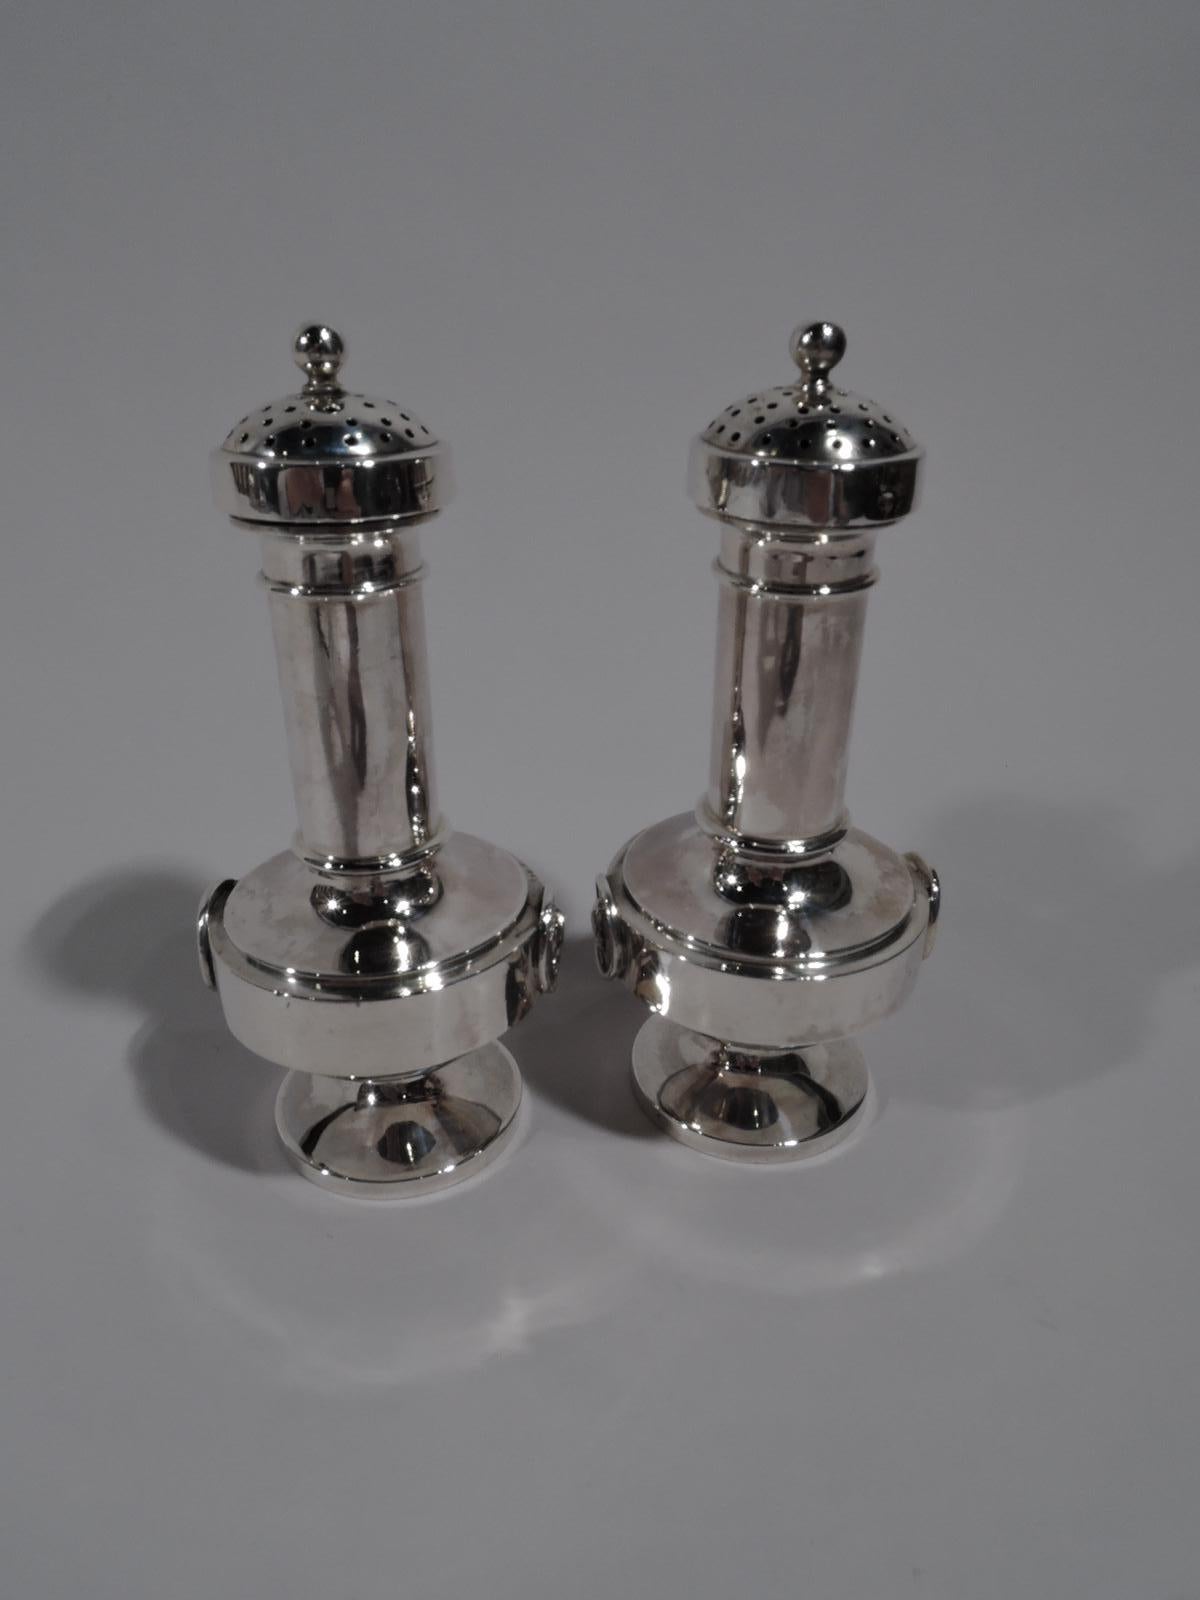 Pair of sterling silver Medallion salt and pepper shakers, circa 1870. Each: Cylindrical neck, bellied bowl, and round foot. Cover domed and overhanging with dense piercing. Two rondels with raised Classical head in profile on lined ground, one is a